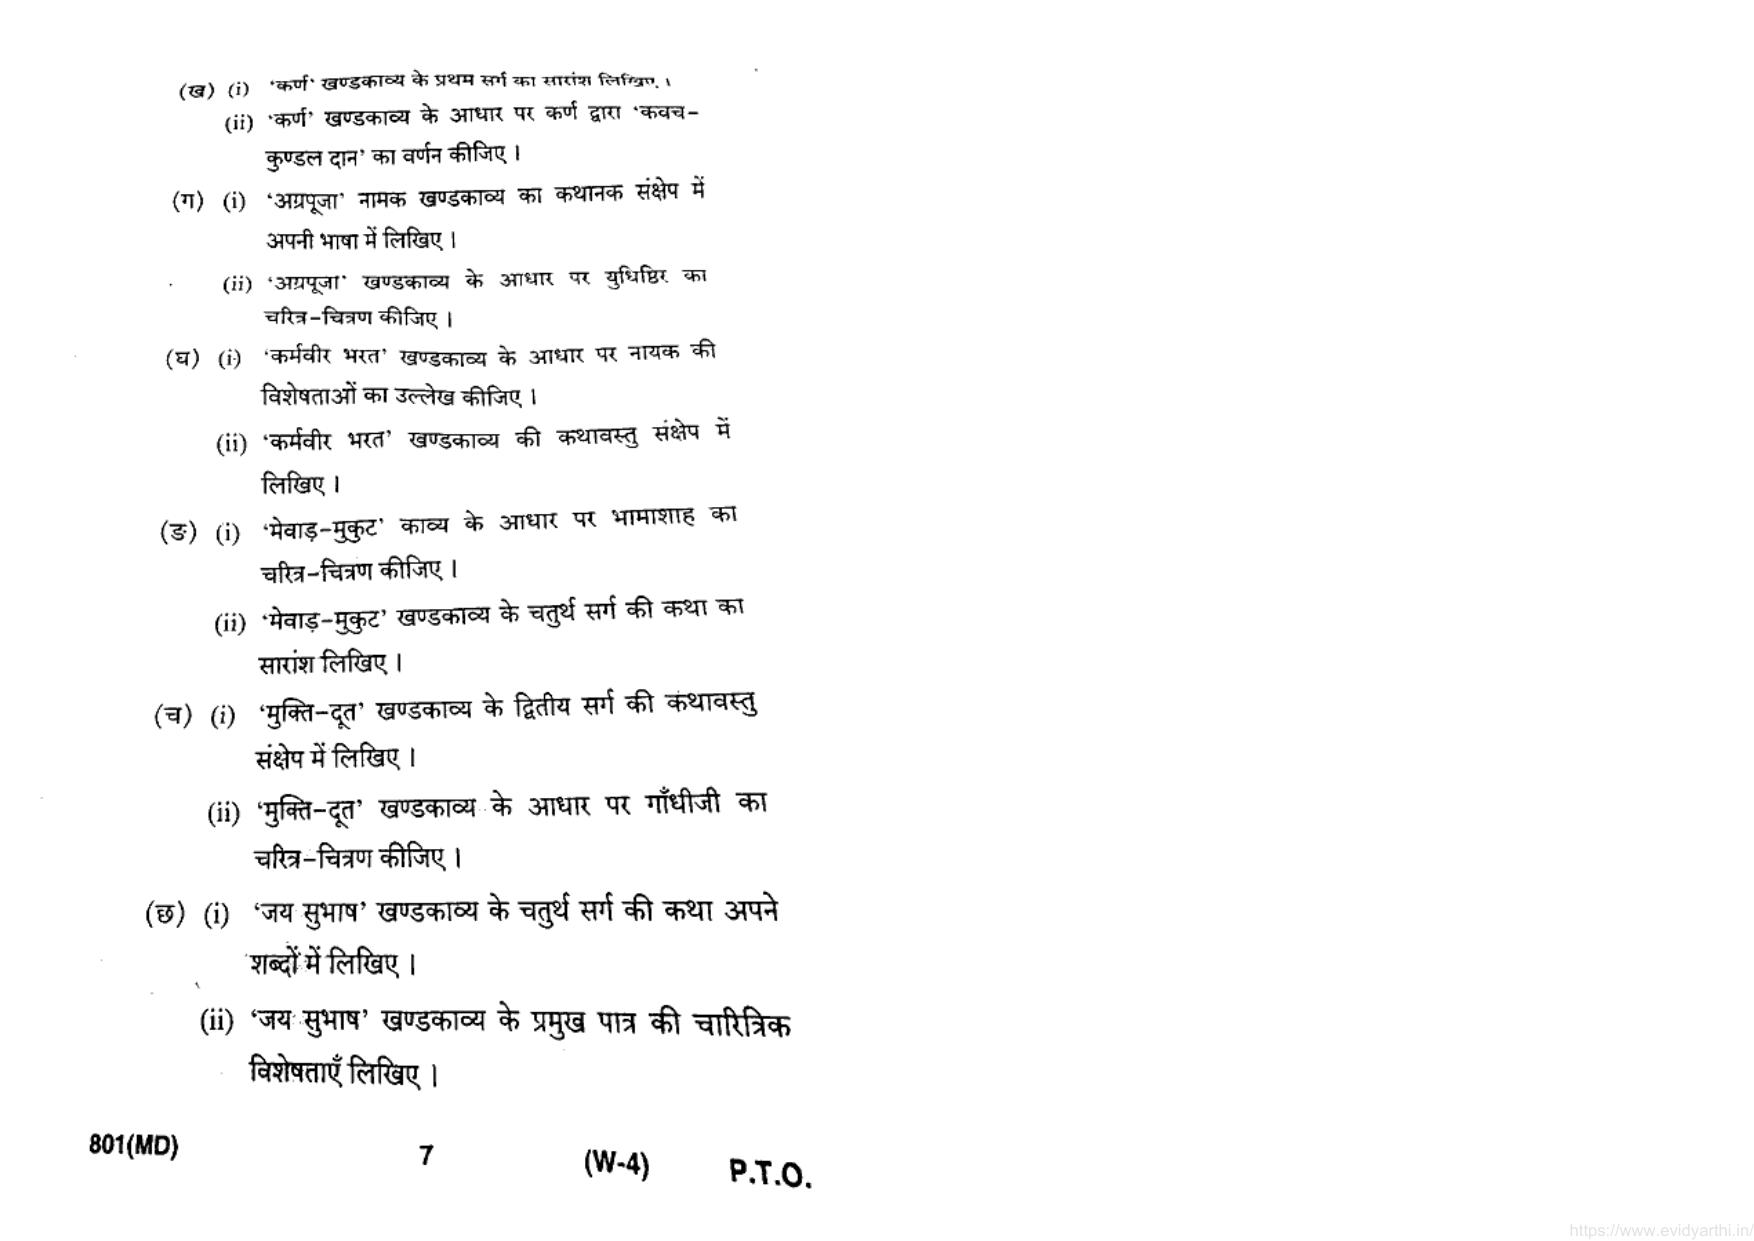 UP Board Previous Year Question Paper Class 10 Hindi (801 MD) – 2020 - Page 4